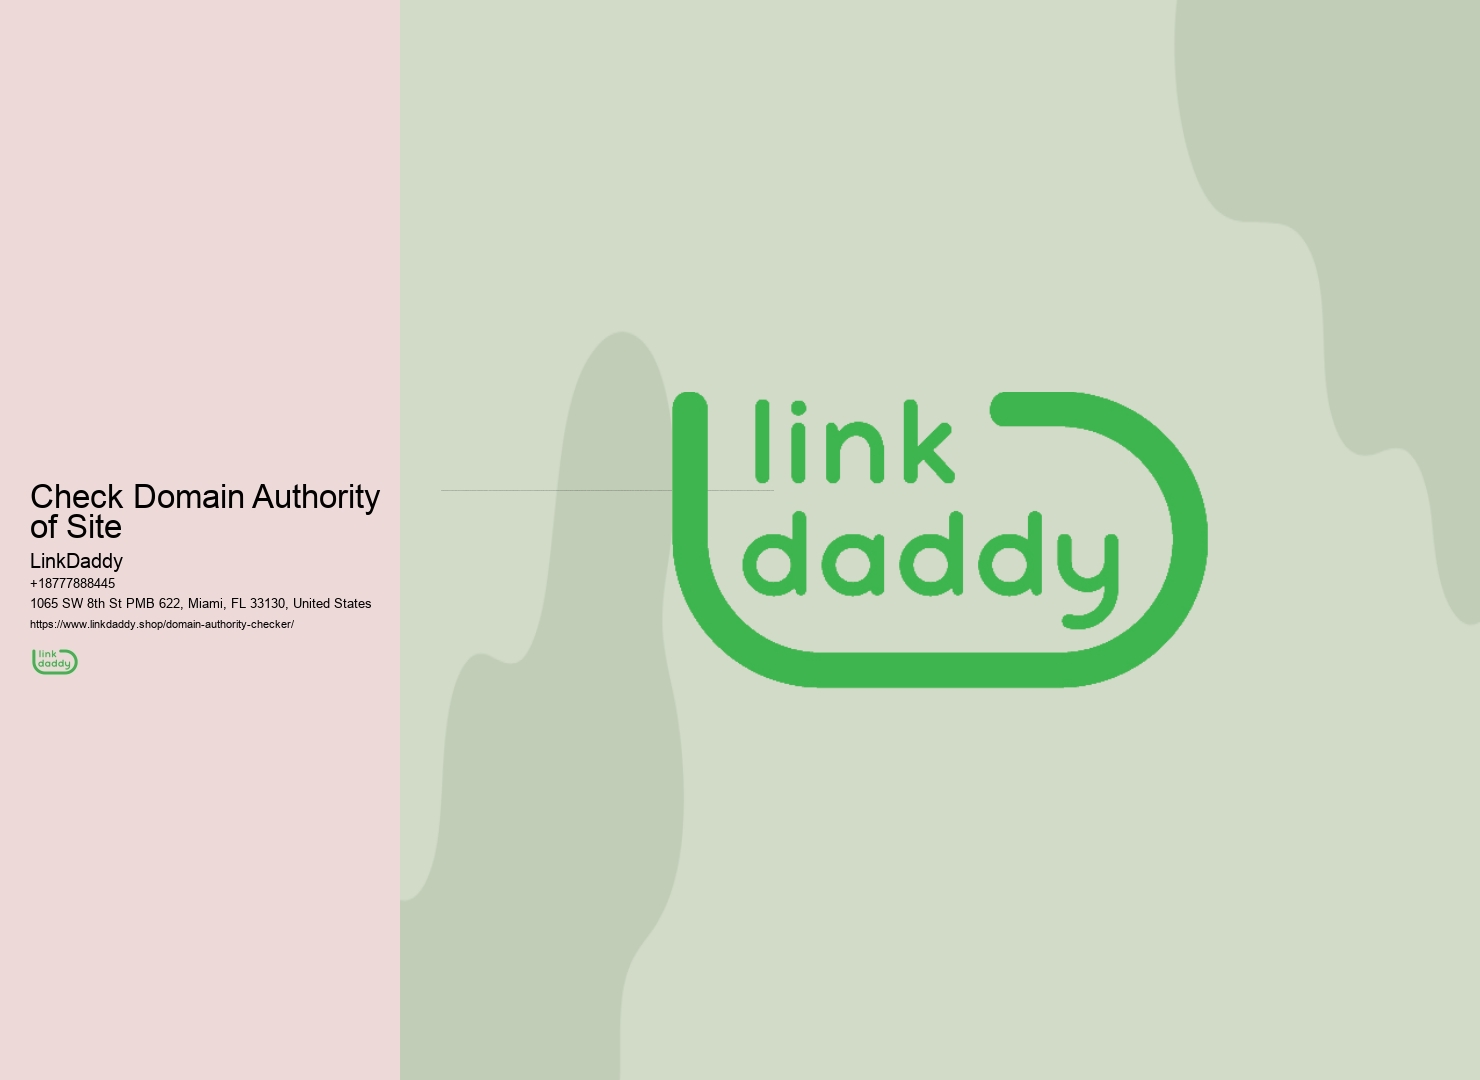 Check Domain Authority of Site